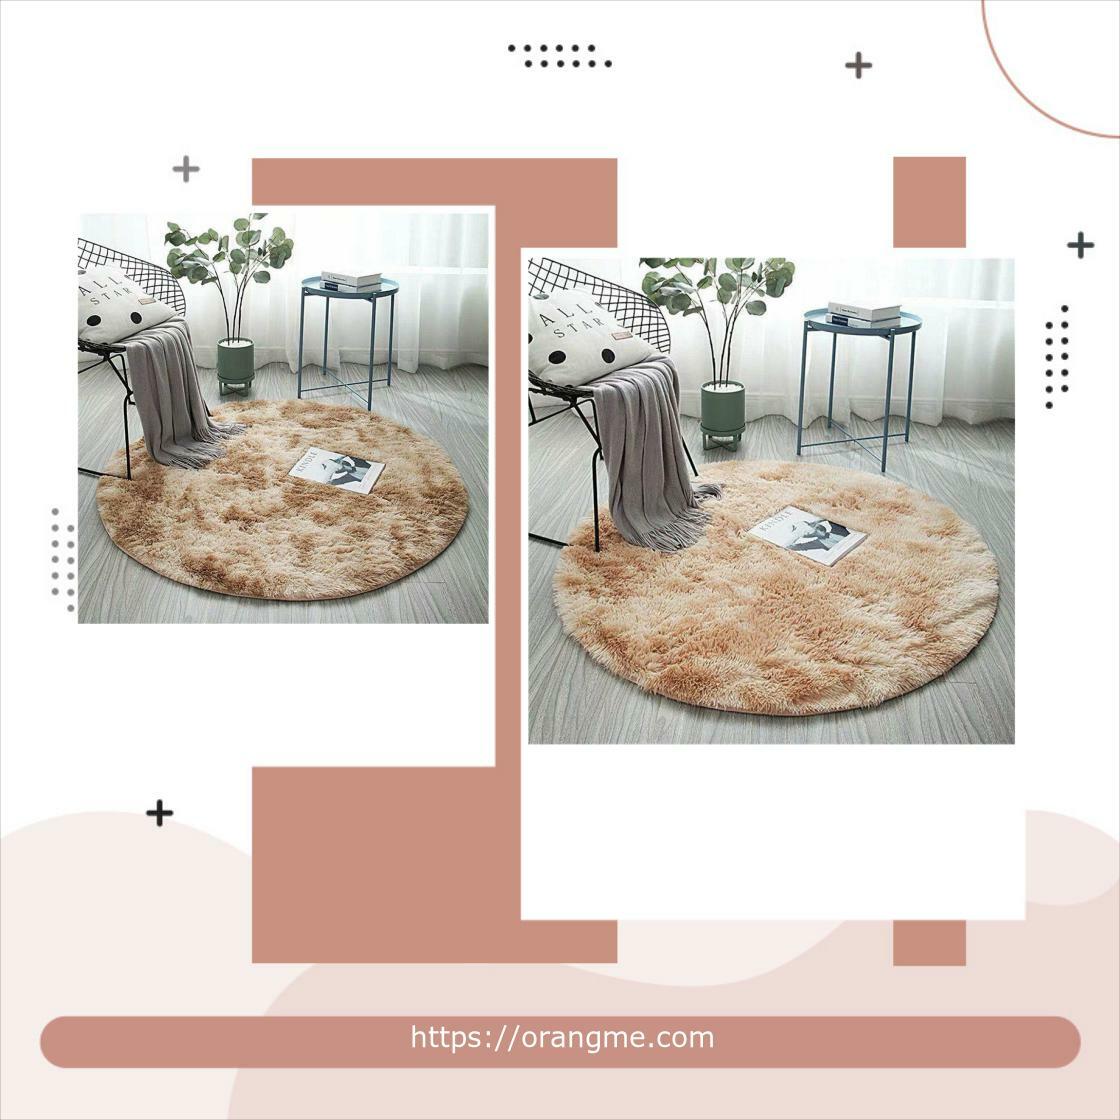 Just in! This unique Fluffy Carpet | Perfect for Cozy Homes for £39.00. 
orangme.com/products/fluff…
#home #decorideas